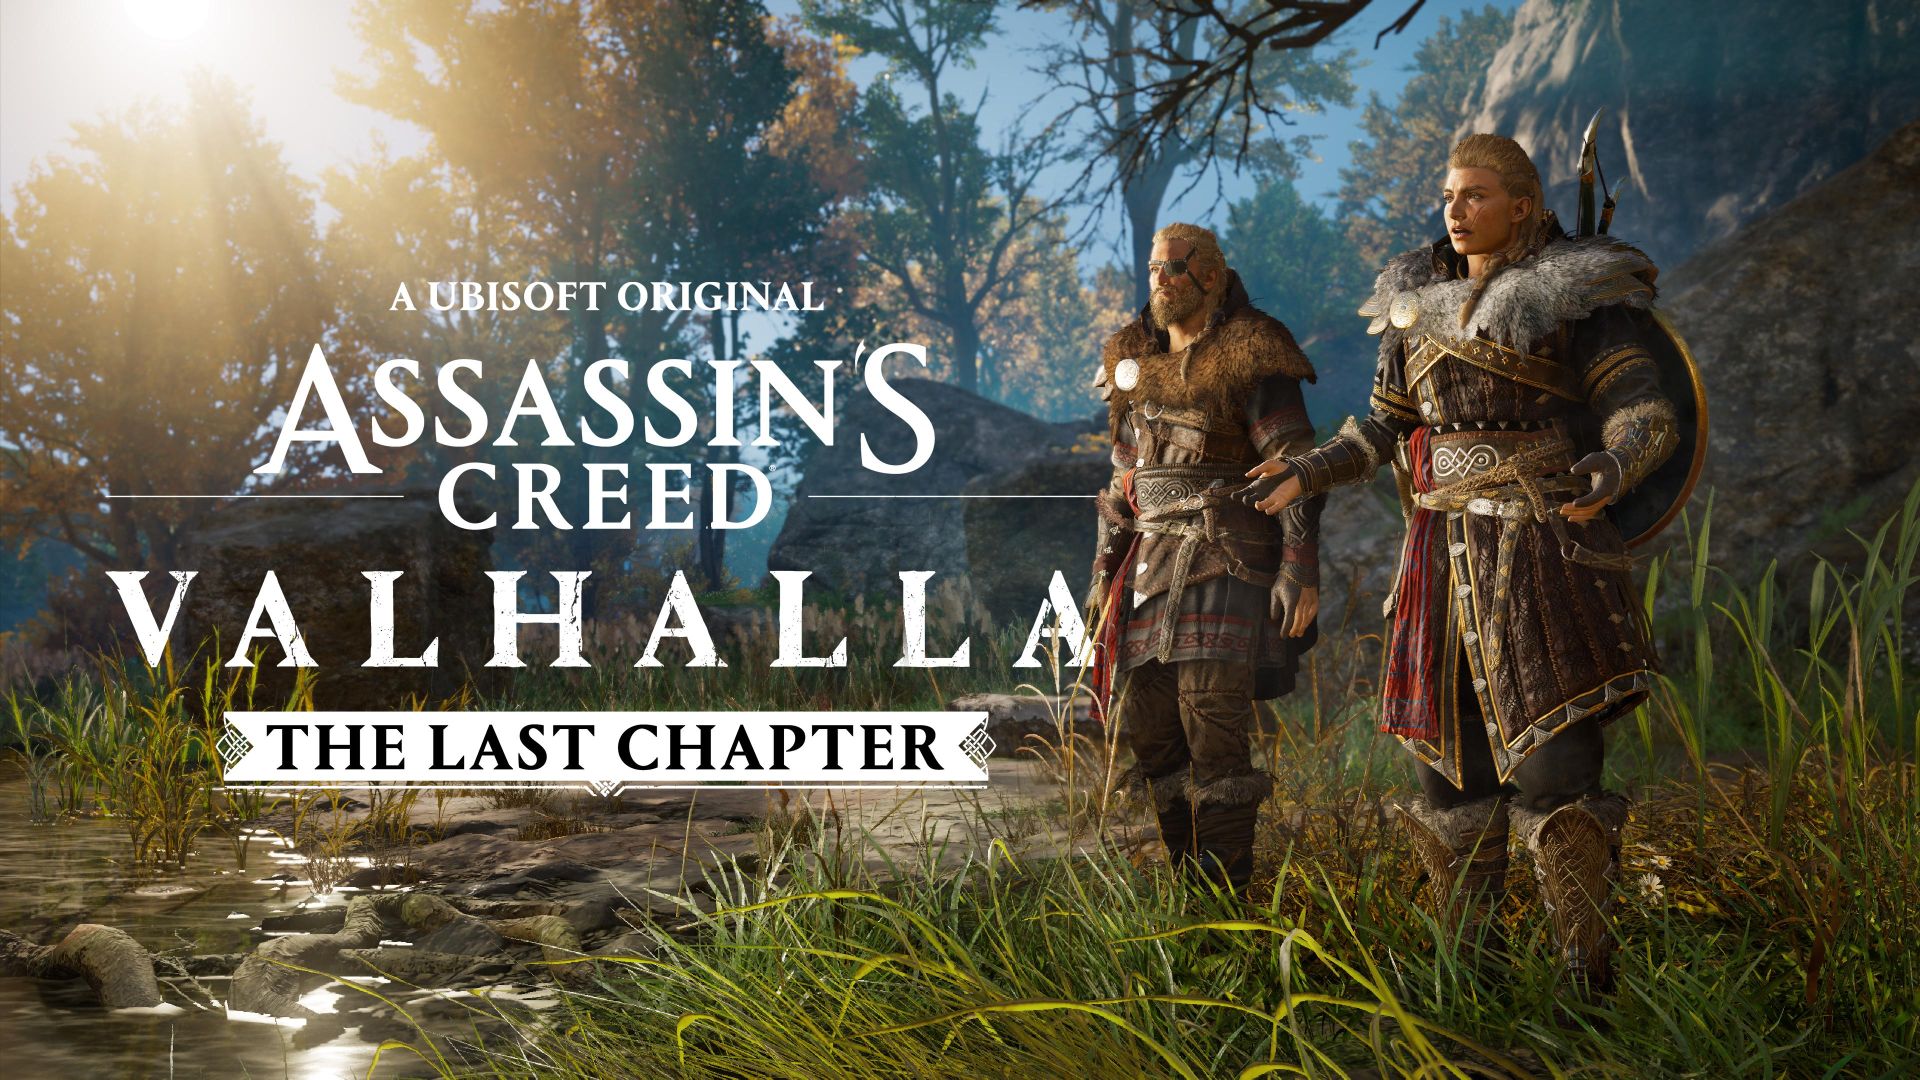 Ubisoft reveals gameplay, release date for 'Assassin's Creed: Valhalla